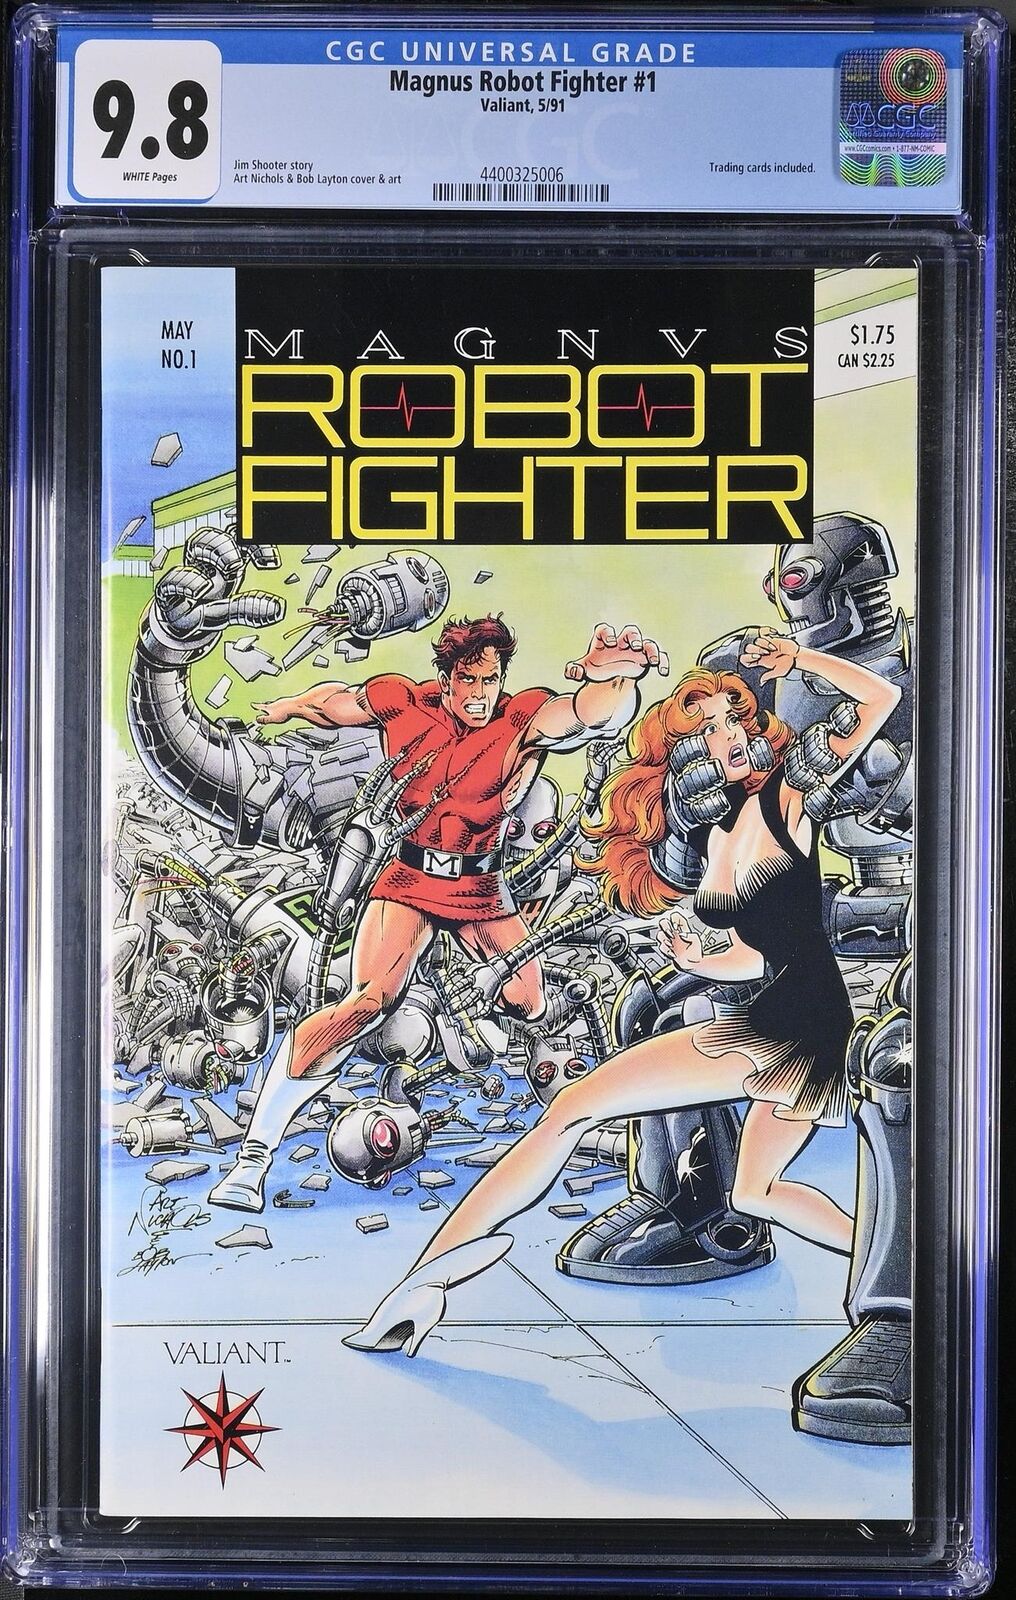 Magnus Robot Fighter 1 CGC 9.8 1991 4400325006 1st Comic by Valiant Trading card